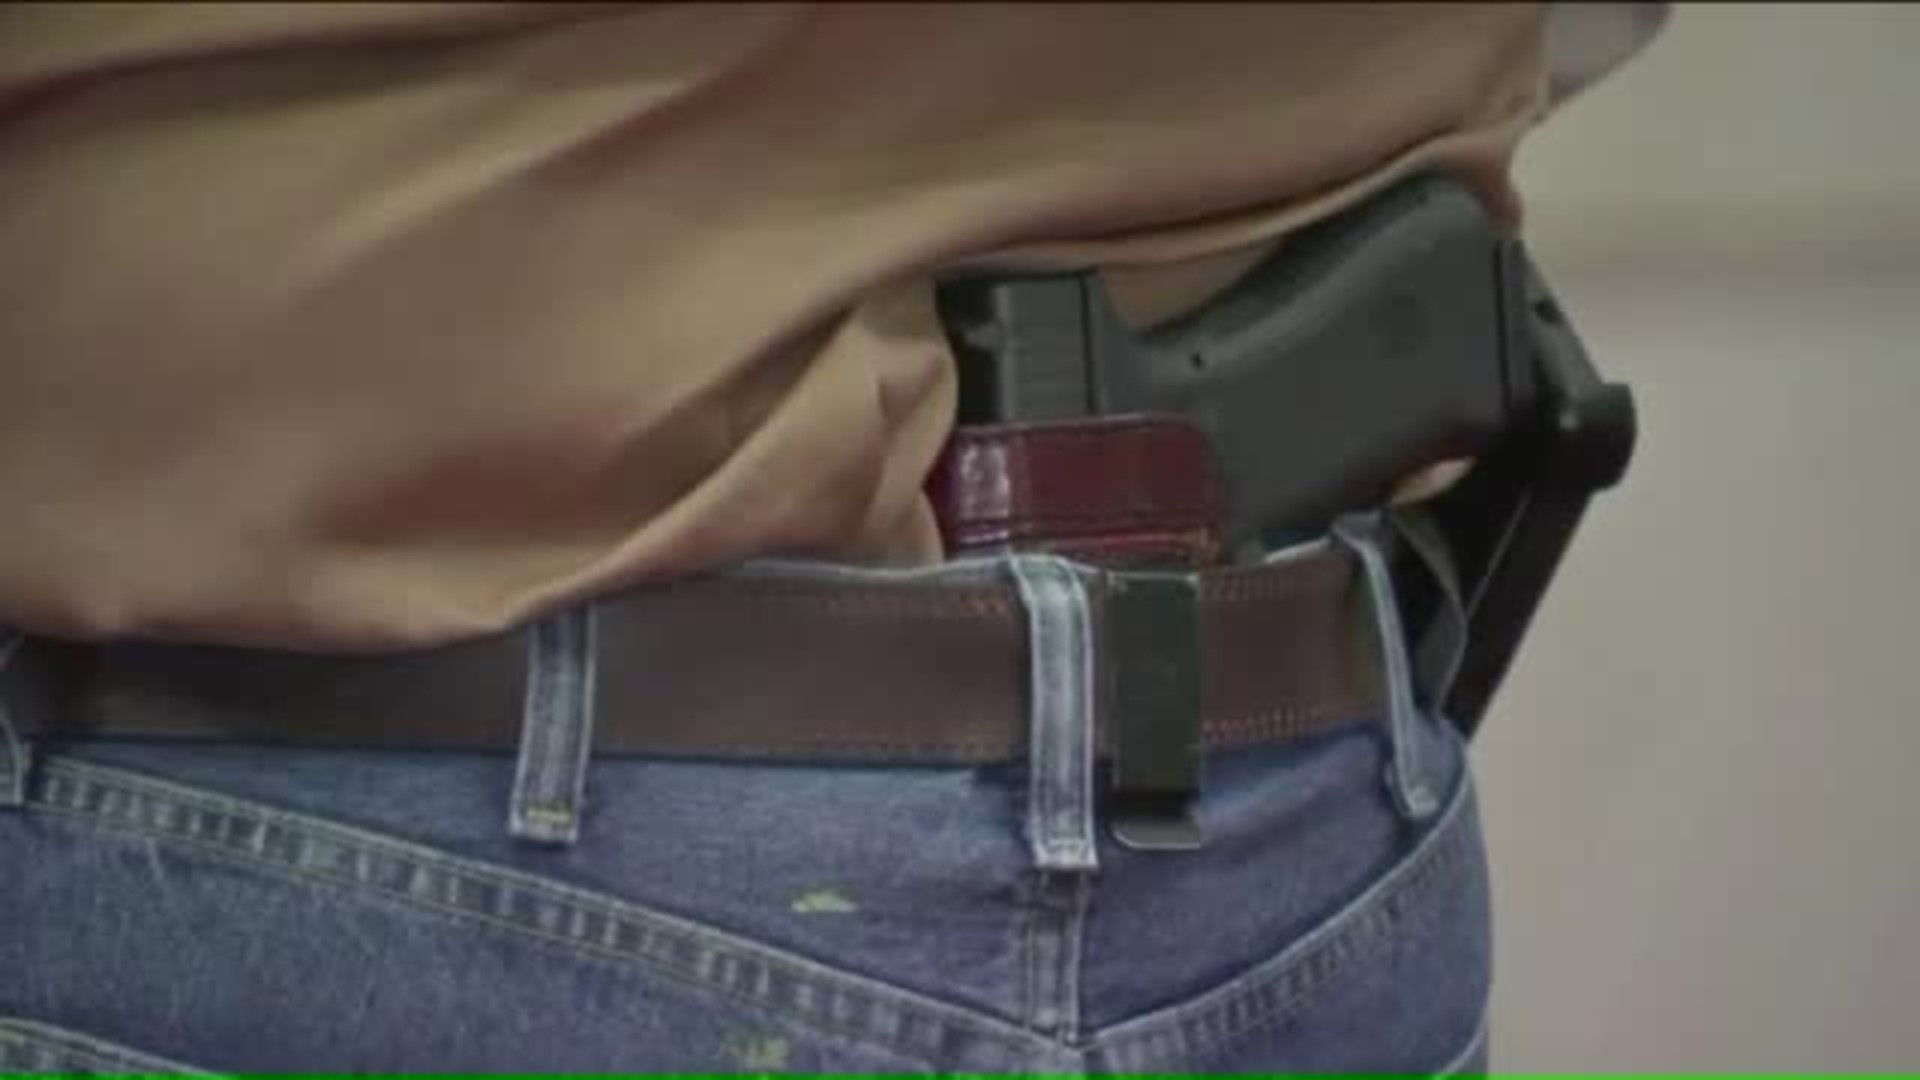 Open carry policy in grocery stores debated